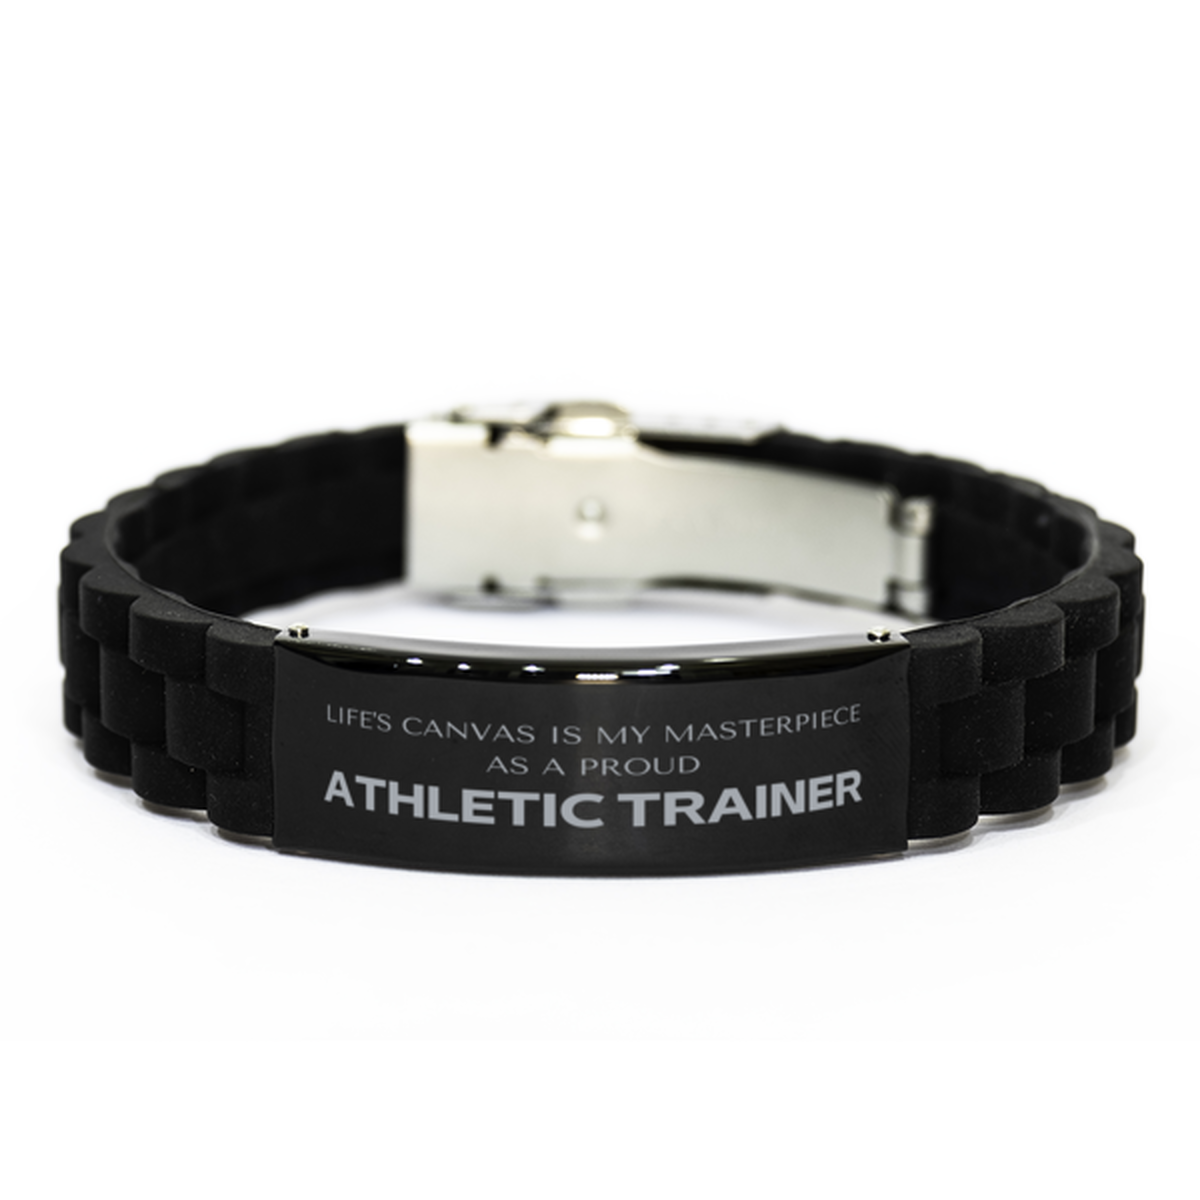 Proud Athletic Trainer Gifts, Life's canvas is my masterpiece, Epic Birthday Christmas Unique Black Glidelock Clasp Bracelet For Athletic Trainer, Coworkers, Men, Women, Friends